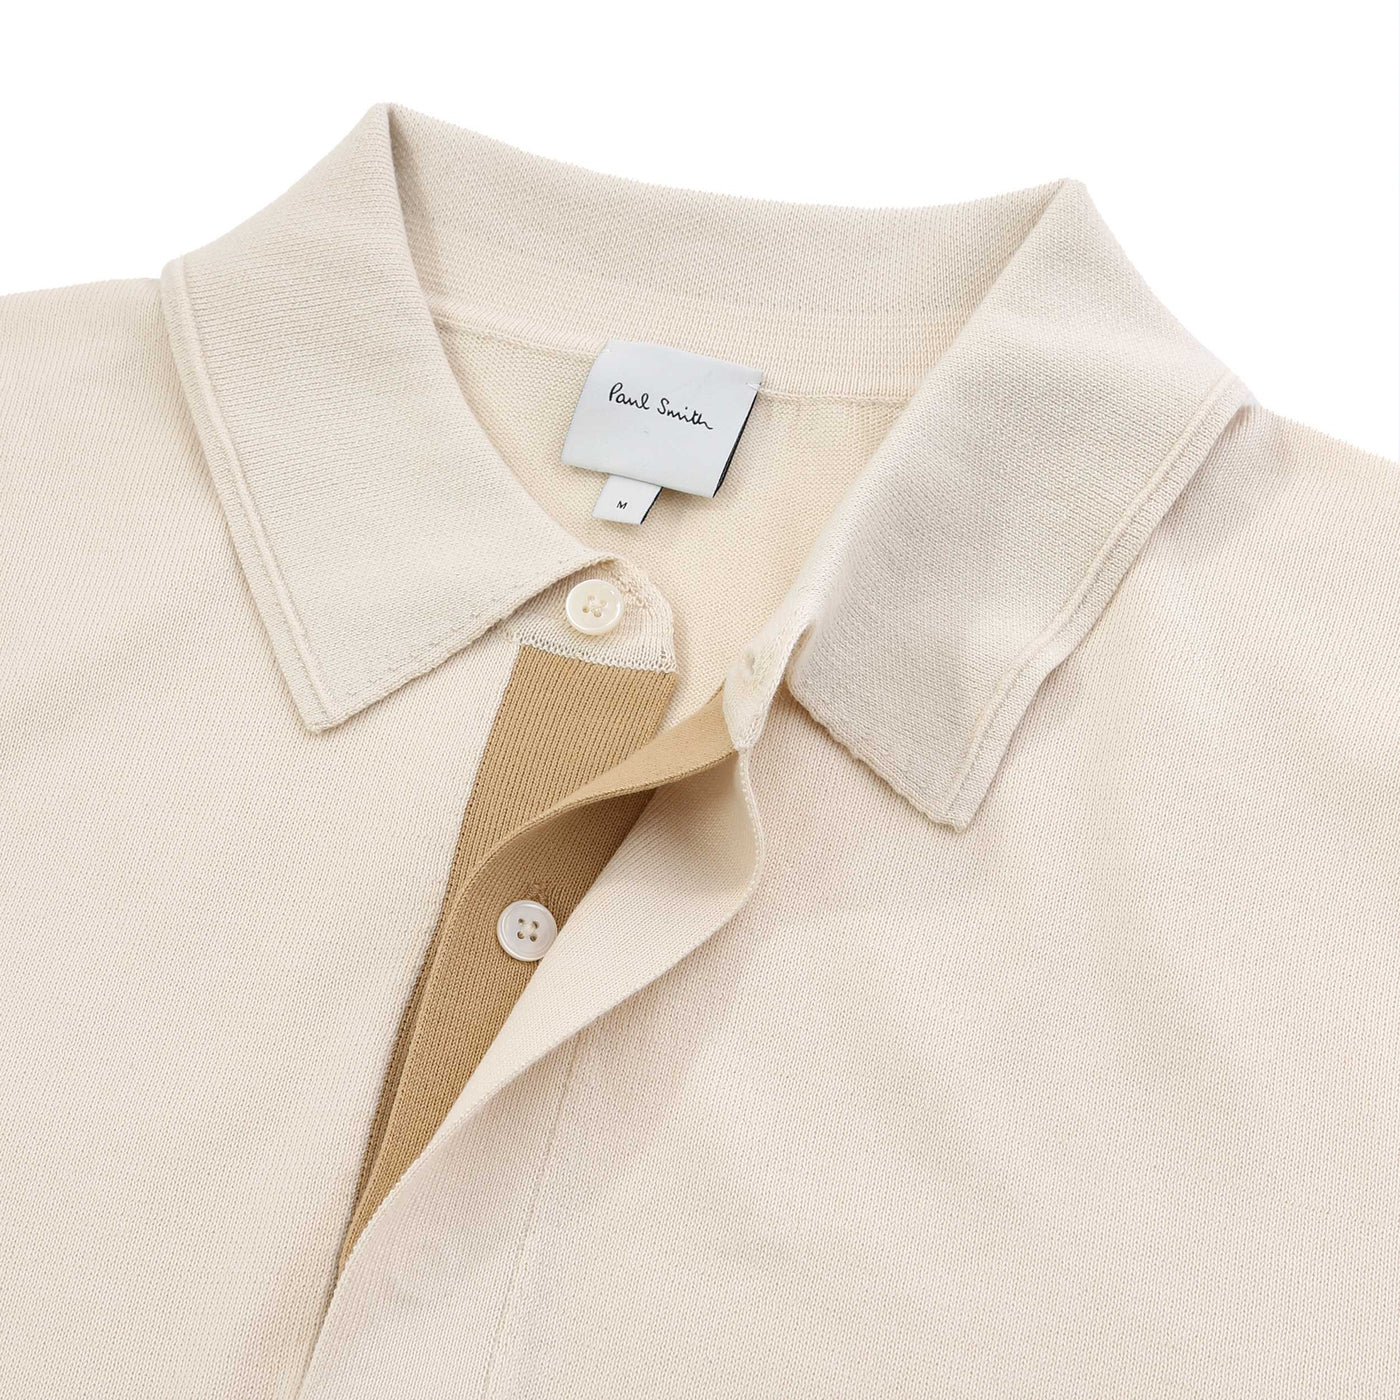 Paul Smith Sweater SS Polo Knitwear in Off White Placket